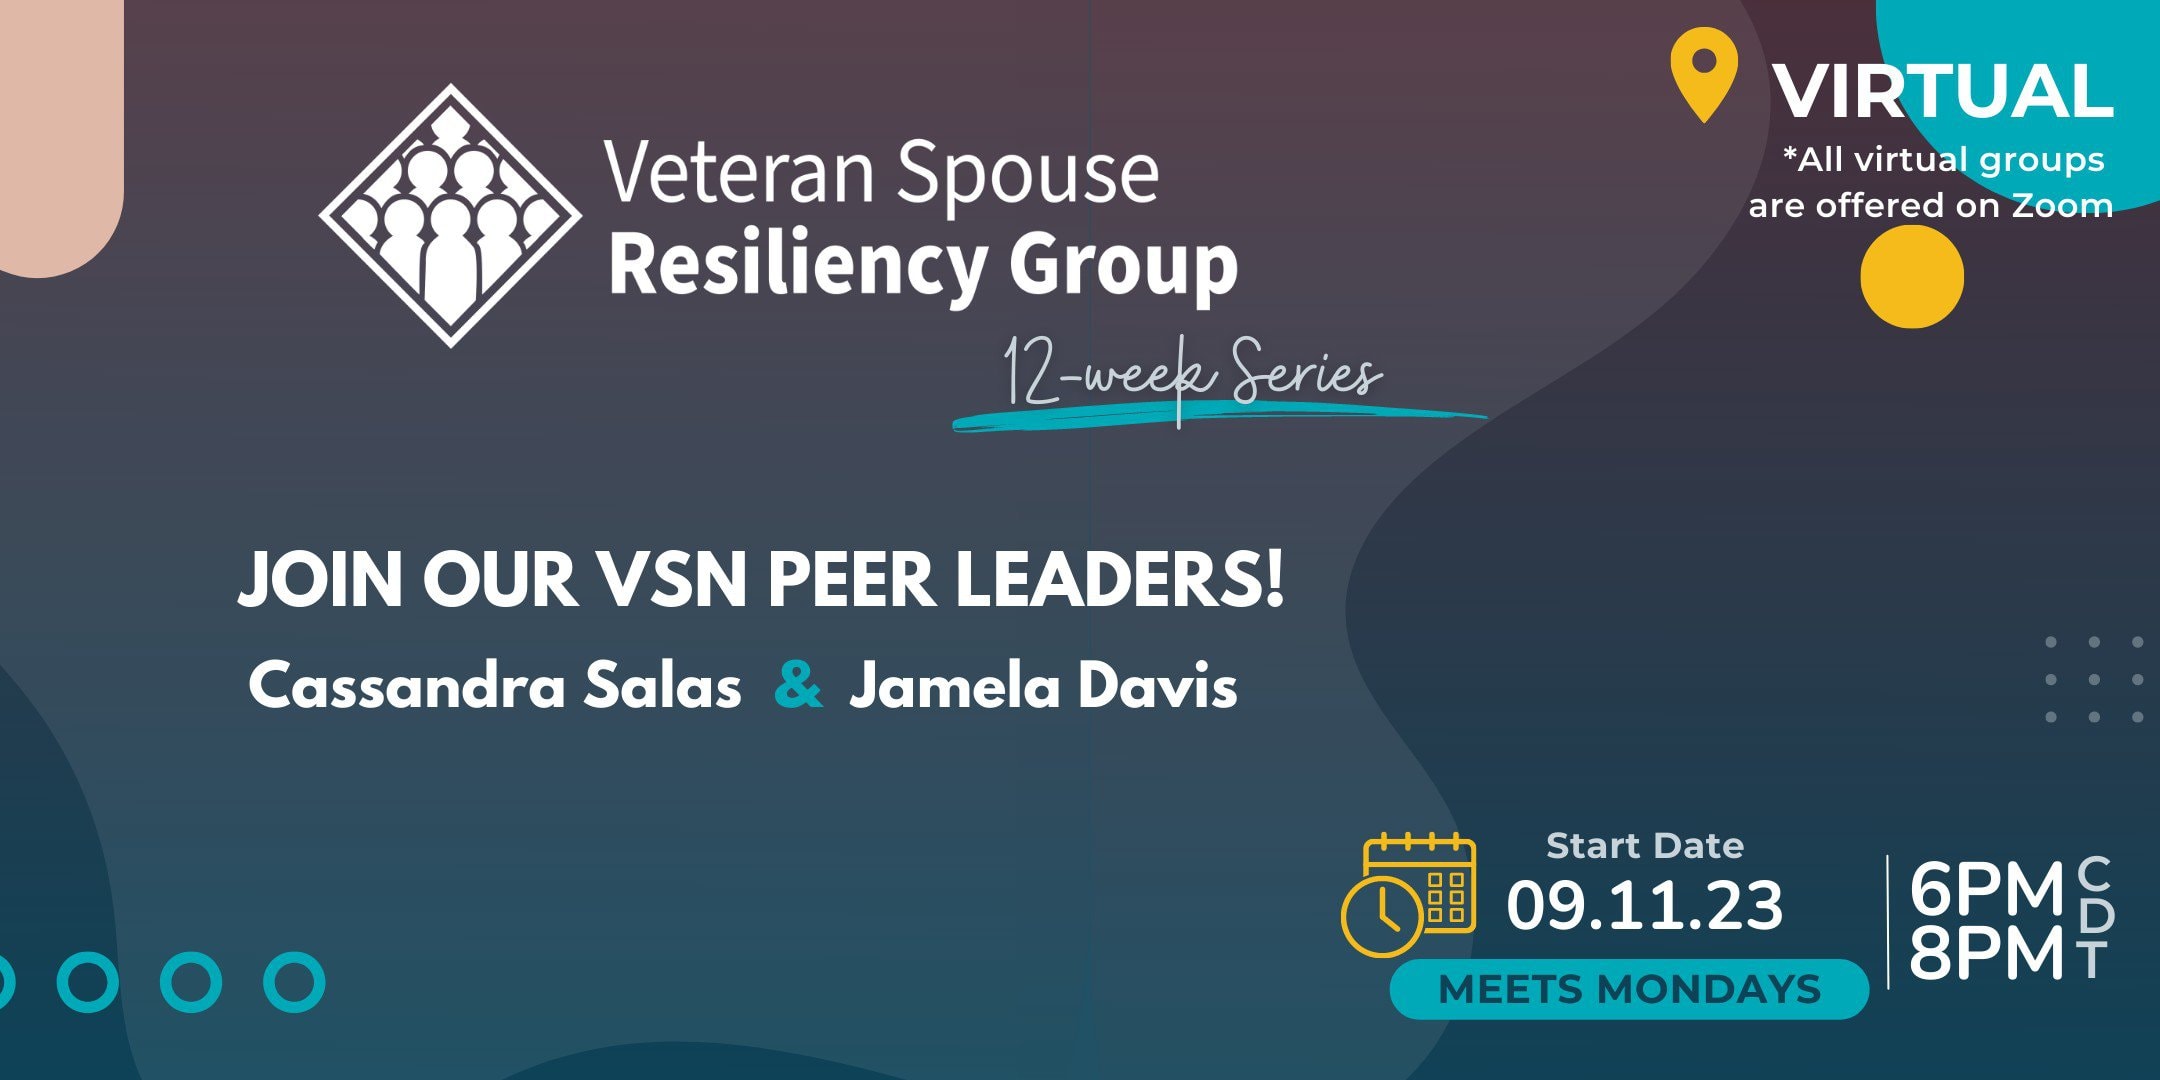 Veteran Spouse Resiliency Group, 12 week group, Join our VSN Peer Leaders, Start Date September 11th for 6pm to 8pm CDT